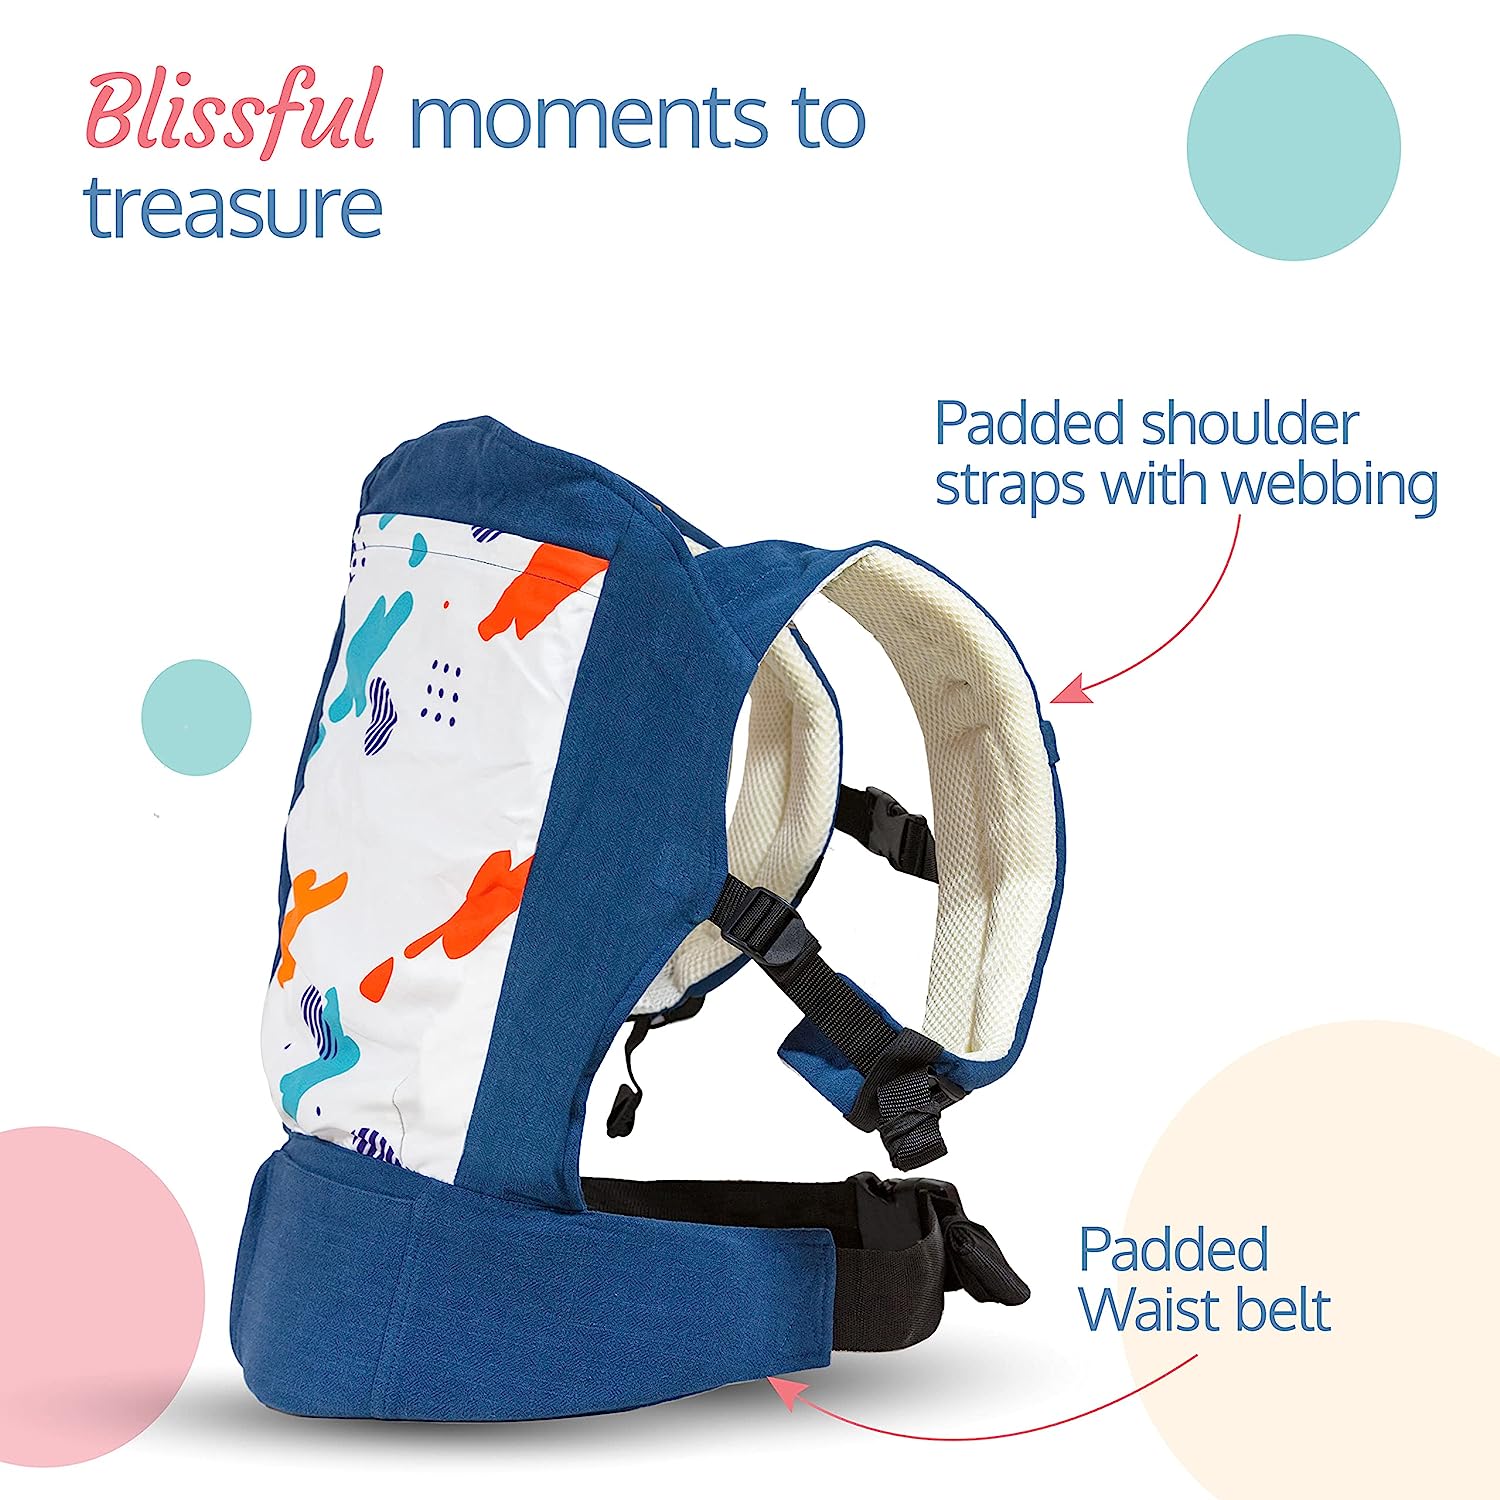 LuvLap-Adore-Baby-Carrier-with-2-carry-positions-Baby-carrier-for-4-to-24-months-baby-Breathable-Skin-friendly-premium-fabric-Adjustable-New-born-to-Toddler-Carrier-Max-weight-Up-to-18-Kgs-Blue